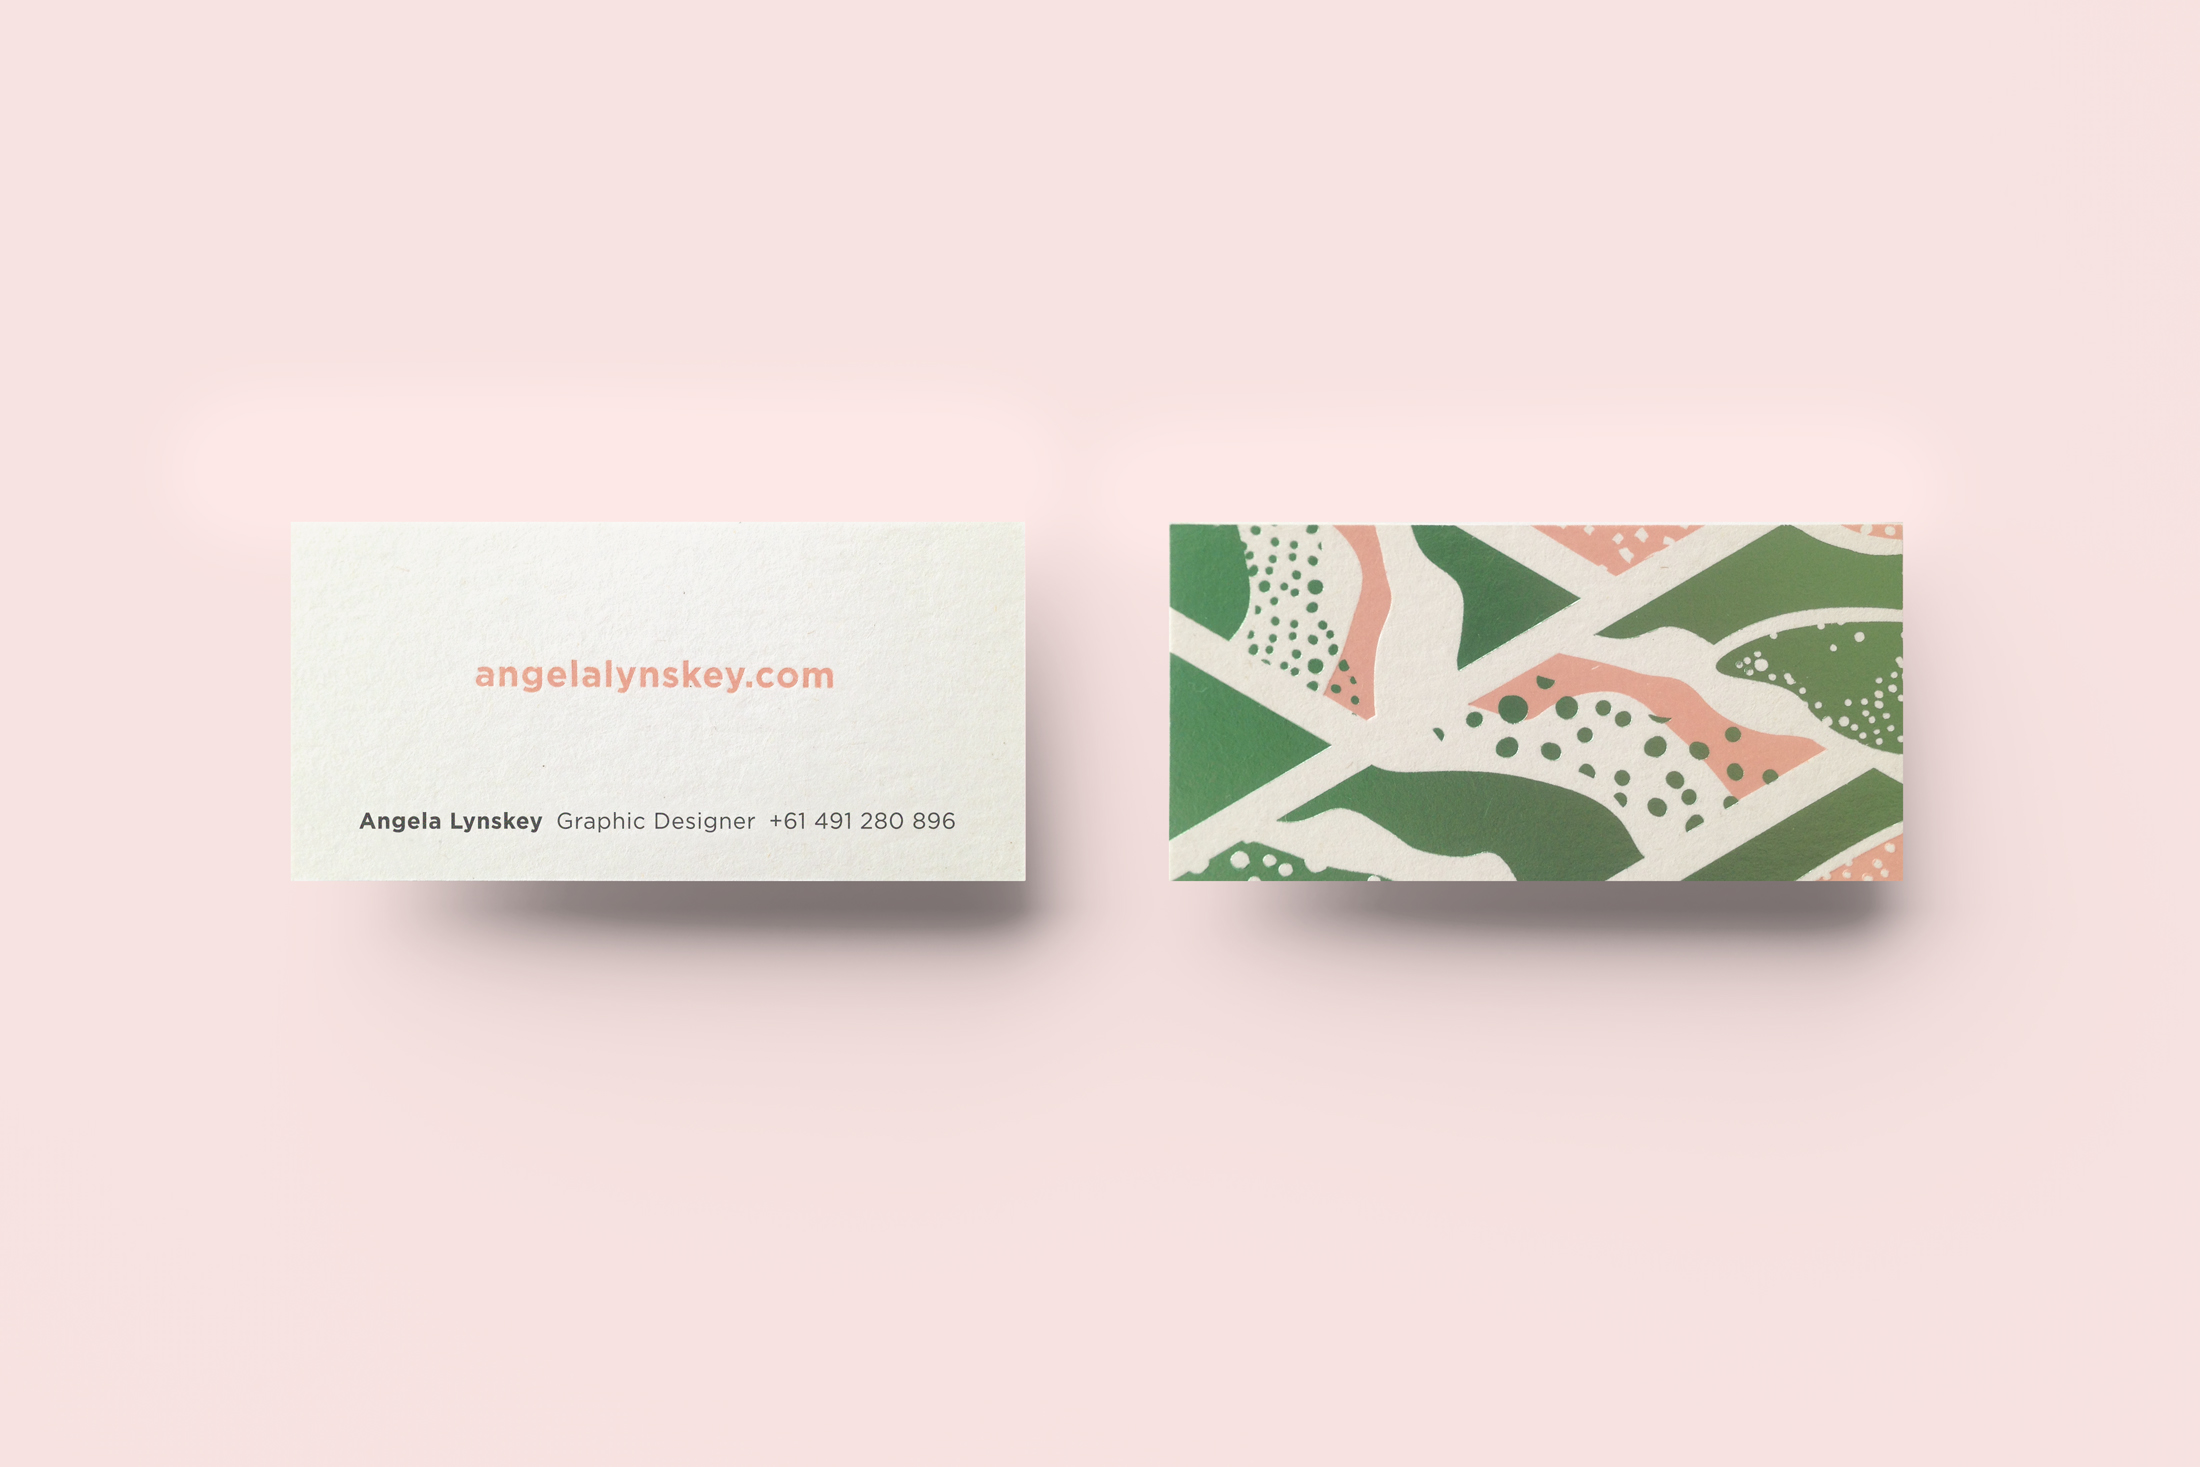  Self promotion: Personal business card. 